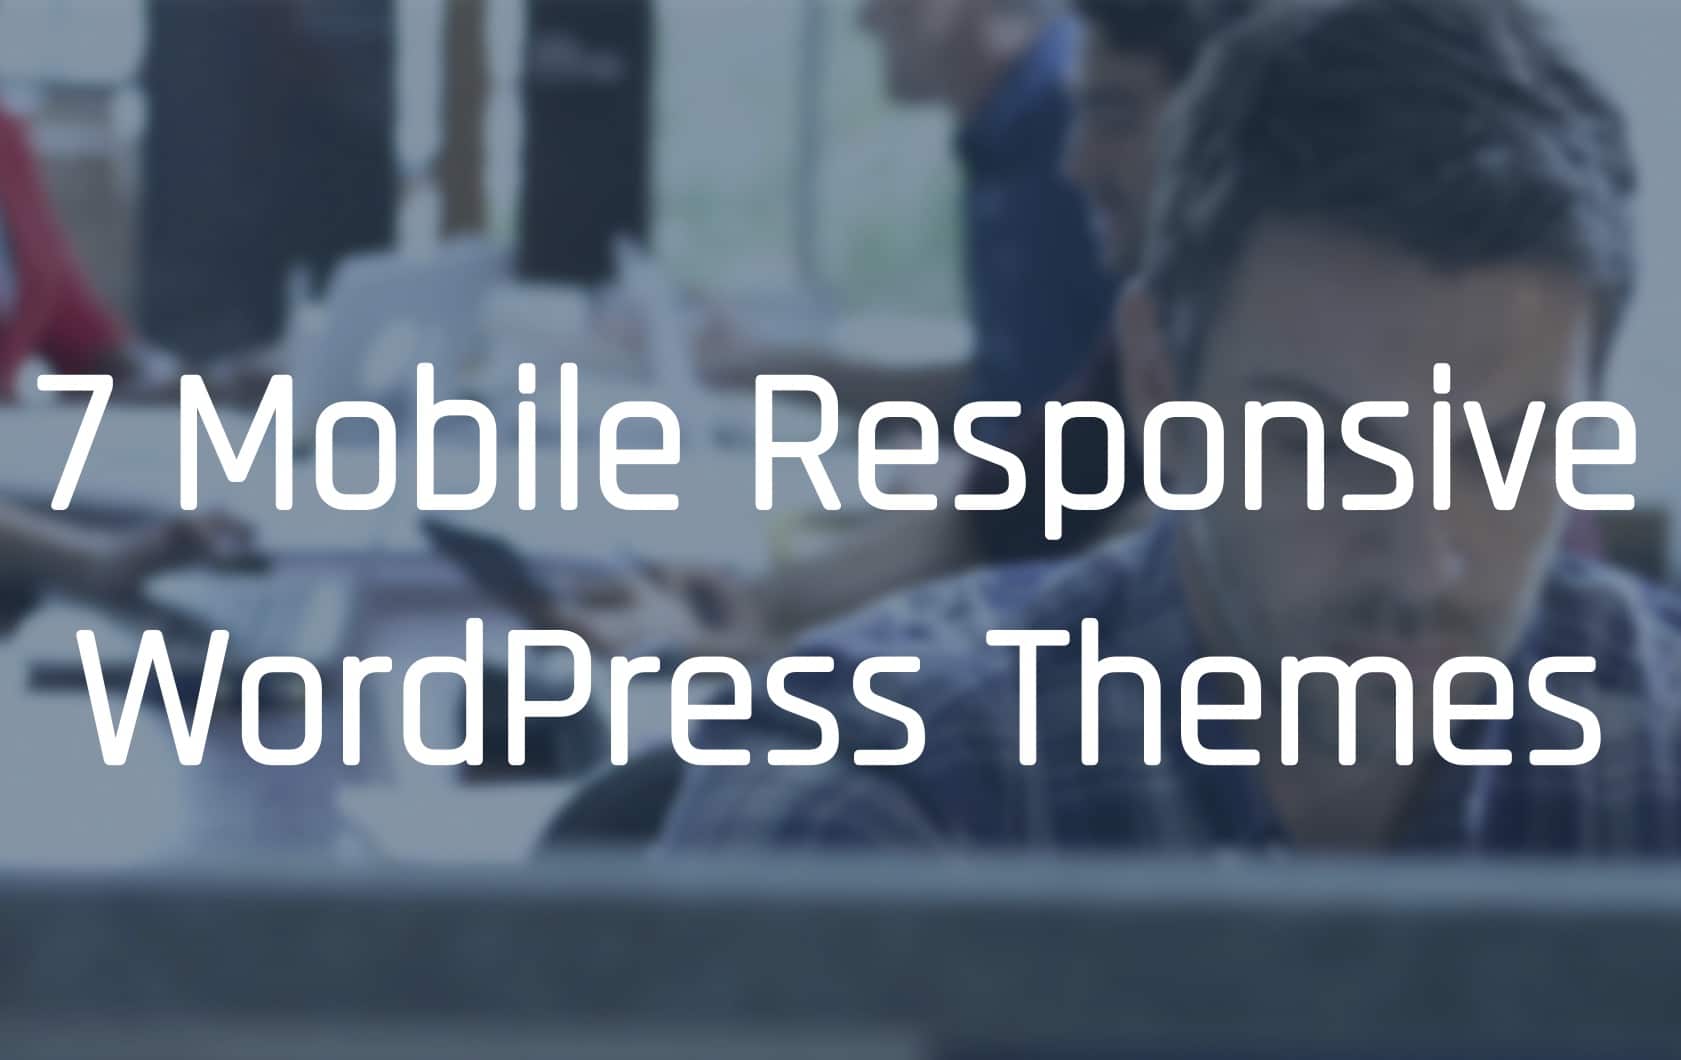 This image is showing seven different mobile responsive WordPress themes that can be used for website design.